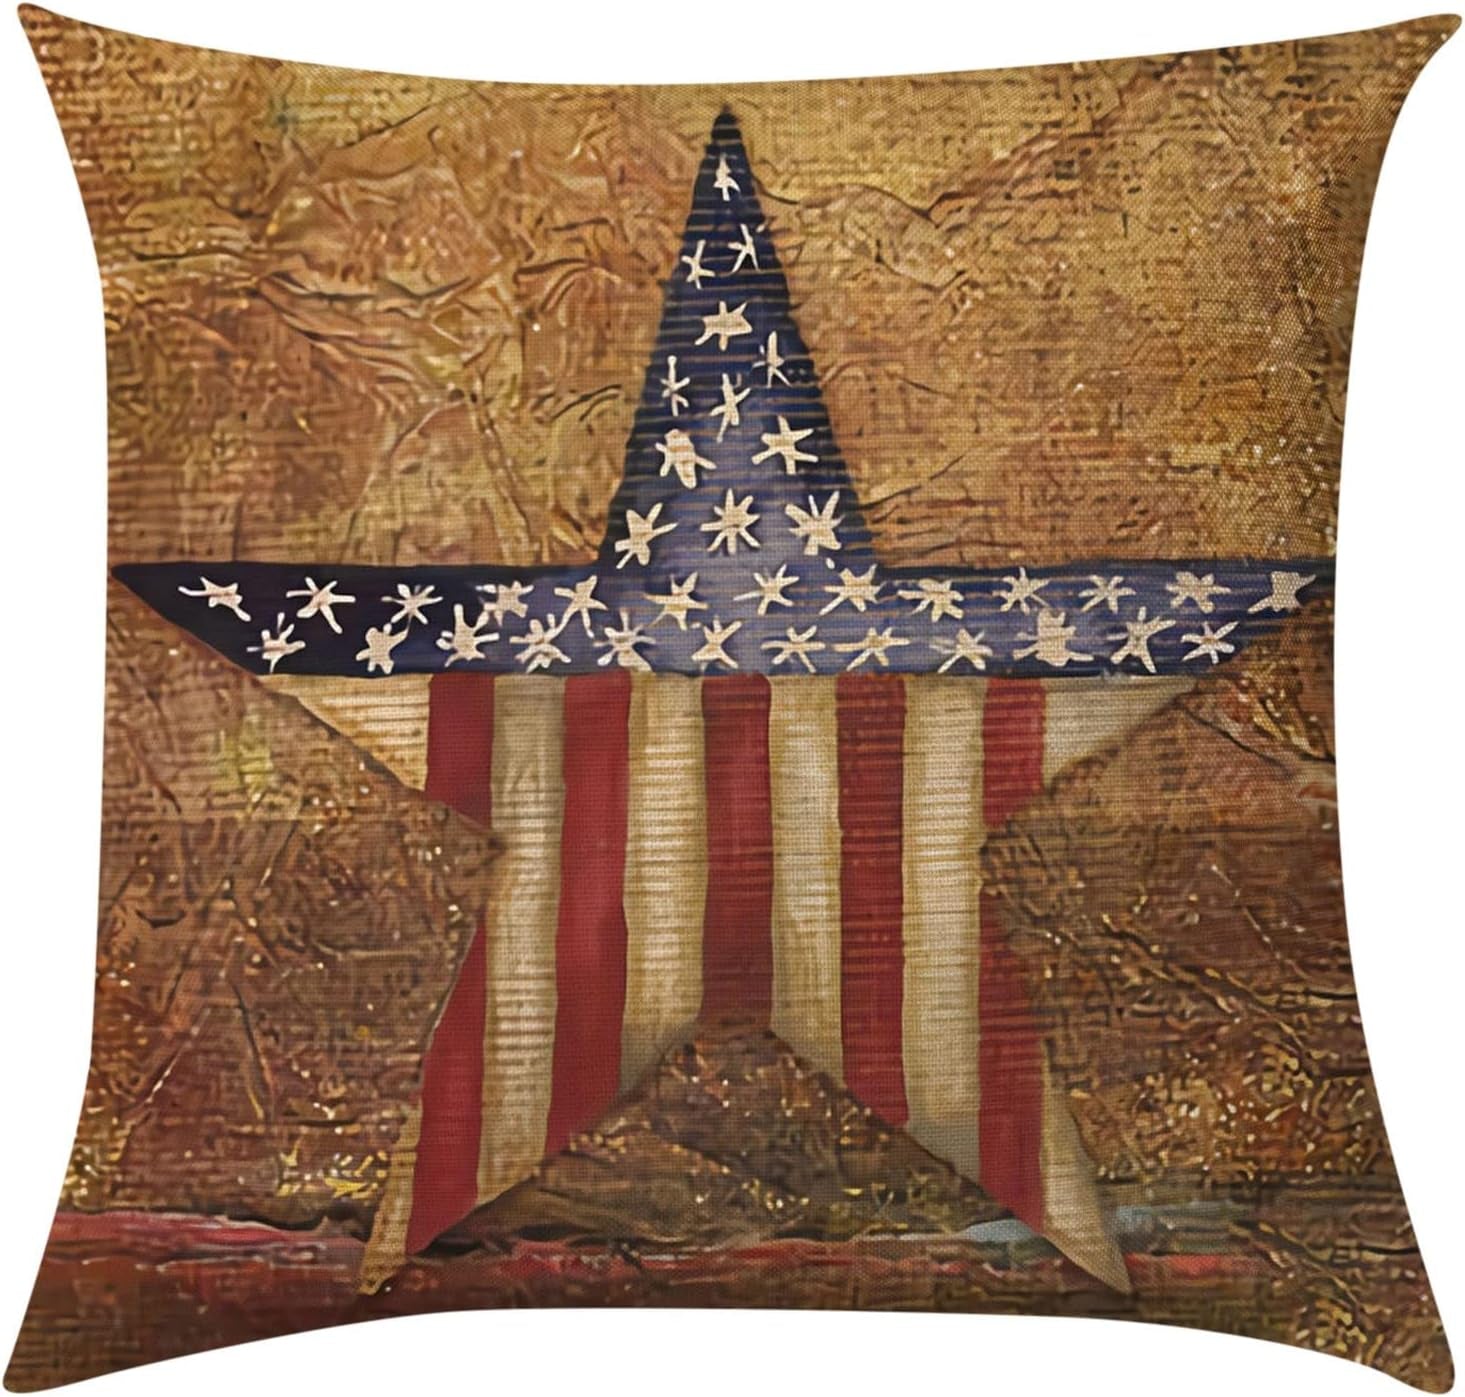 4Th of July Decorations Pillow Covers 18X18 Blue Stars Red White Stripes America Patriotic Pillows Vintage Memorial Day 1776 USA Fourth of July Throw Pillows for Home Sofa Couch Prime of Day